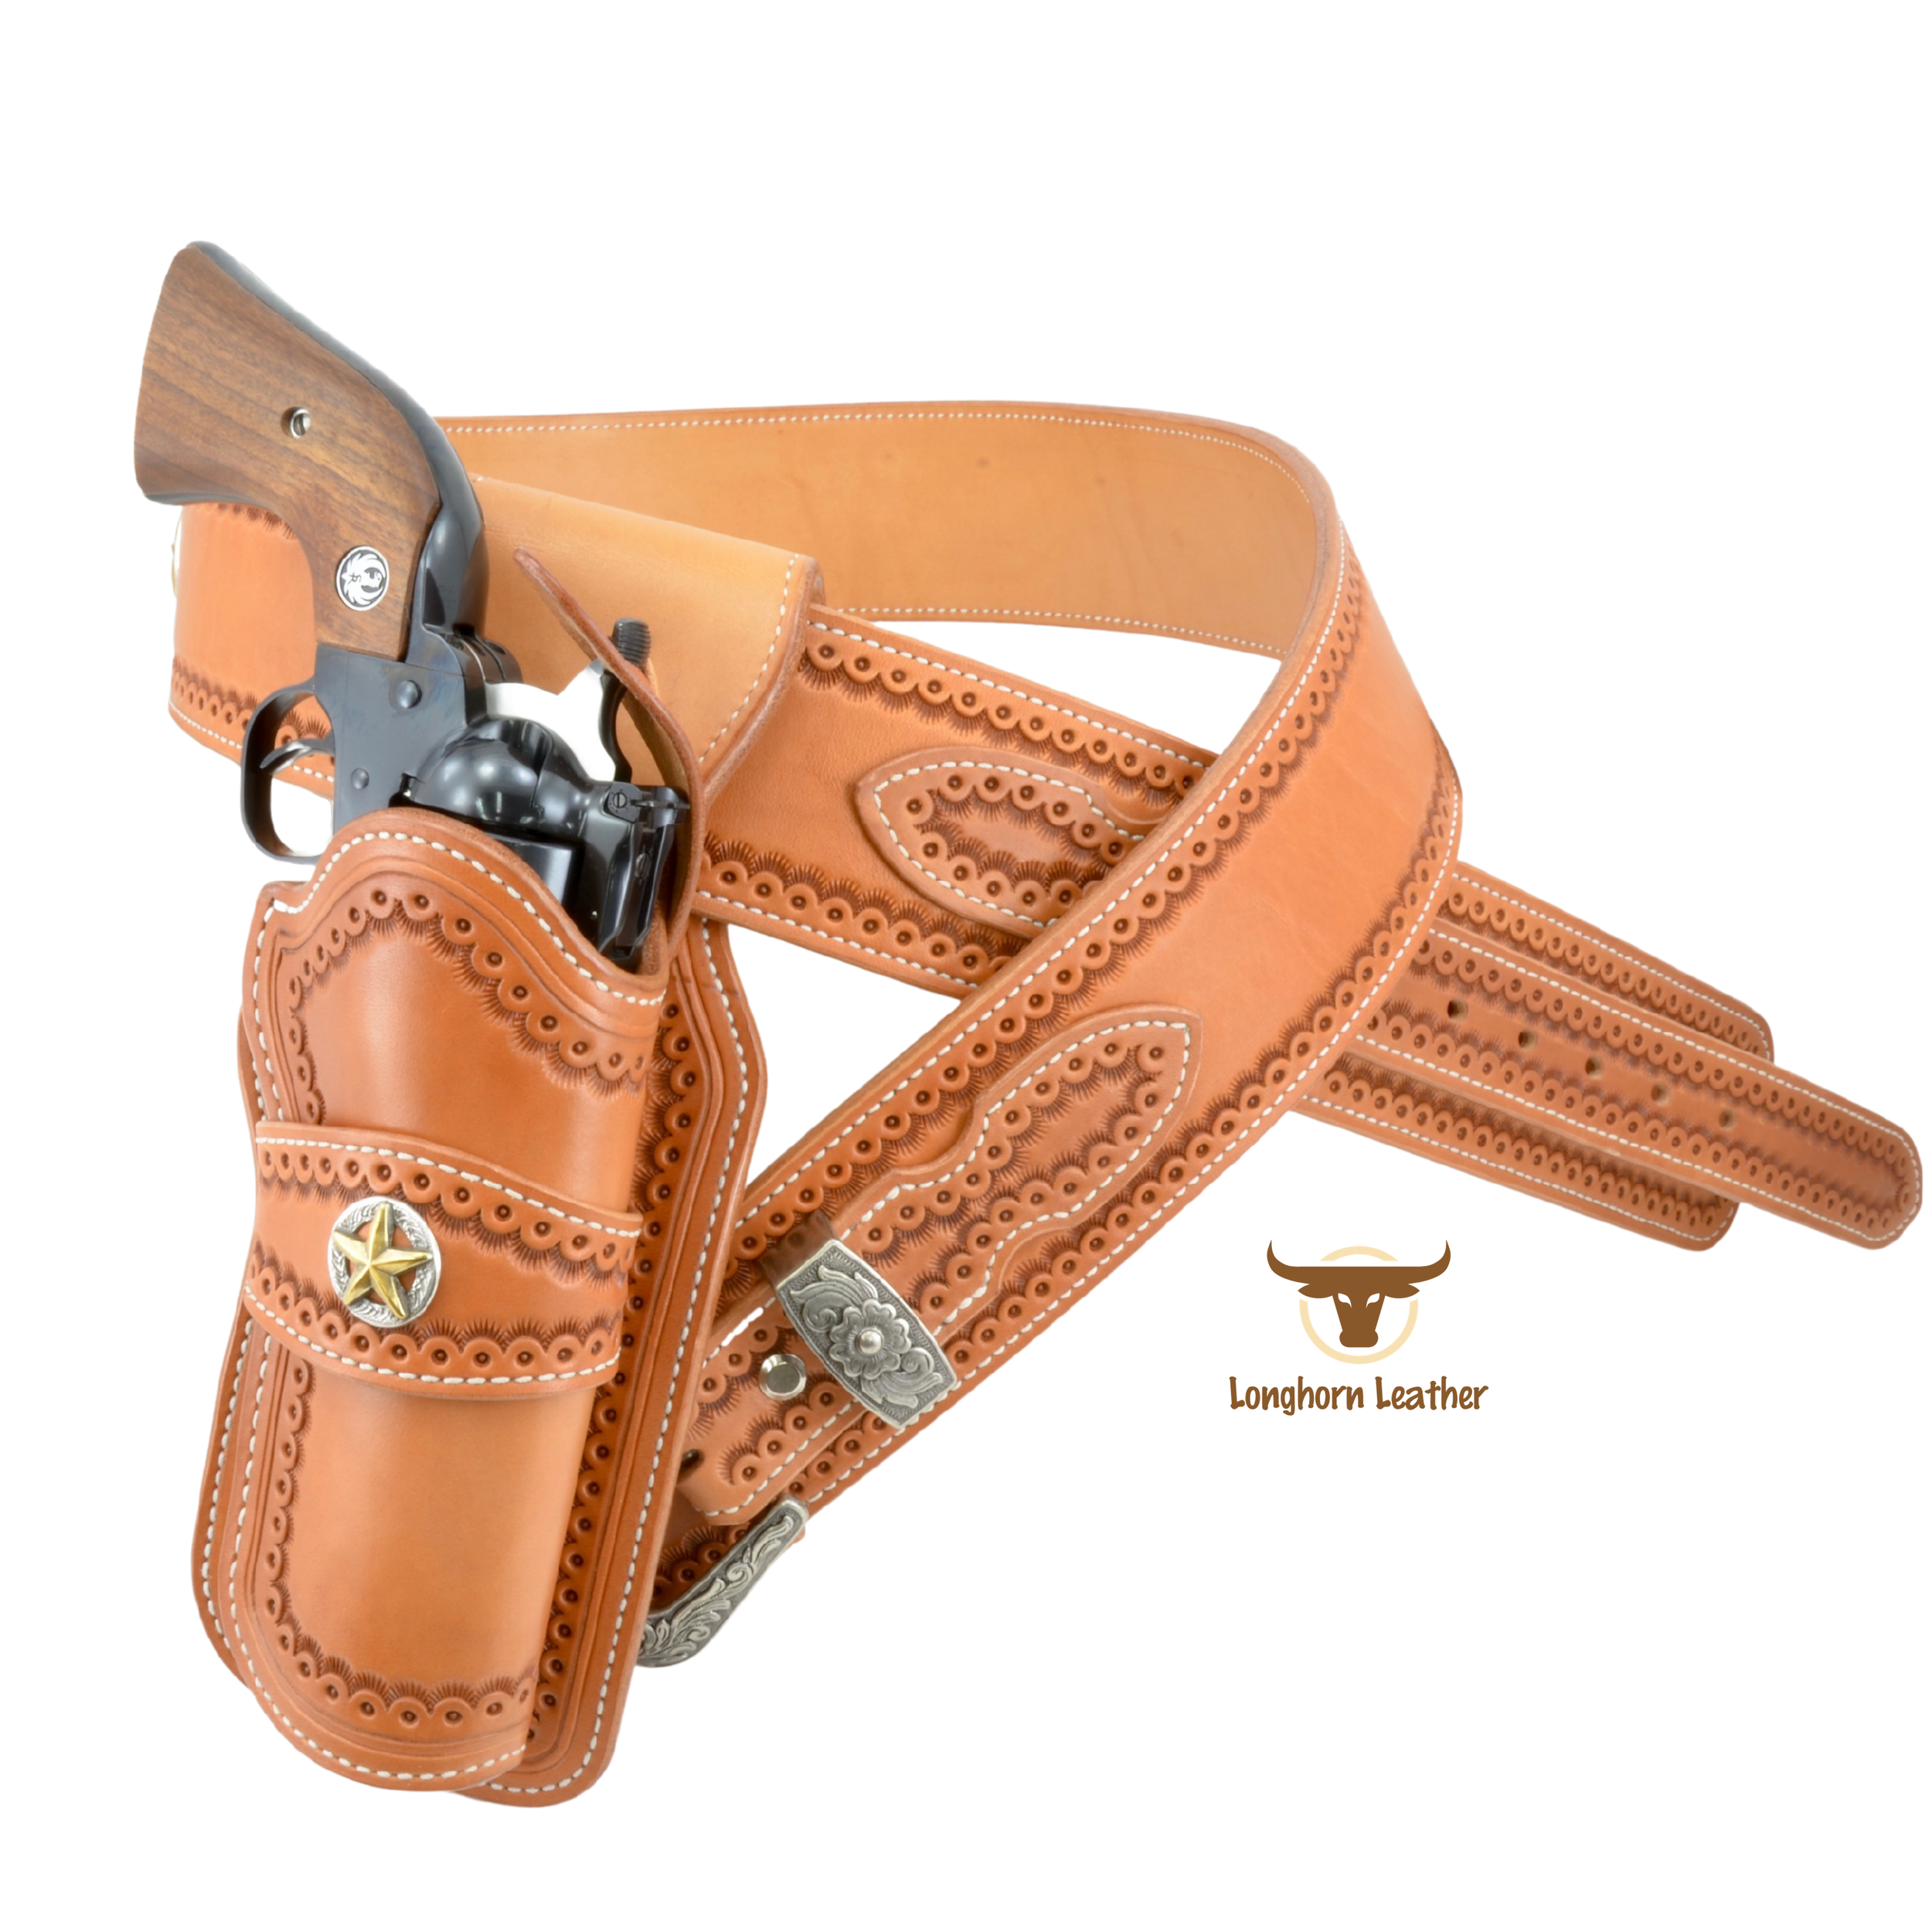 Longhorn Leather AZ-Longhorn Leather AZ - Custom gun leather for the  discerning shooter. We specialize in custom (made to order) leather holsters  and gun belts for single action enthusiasts, as well as,